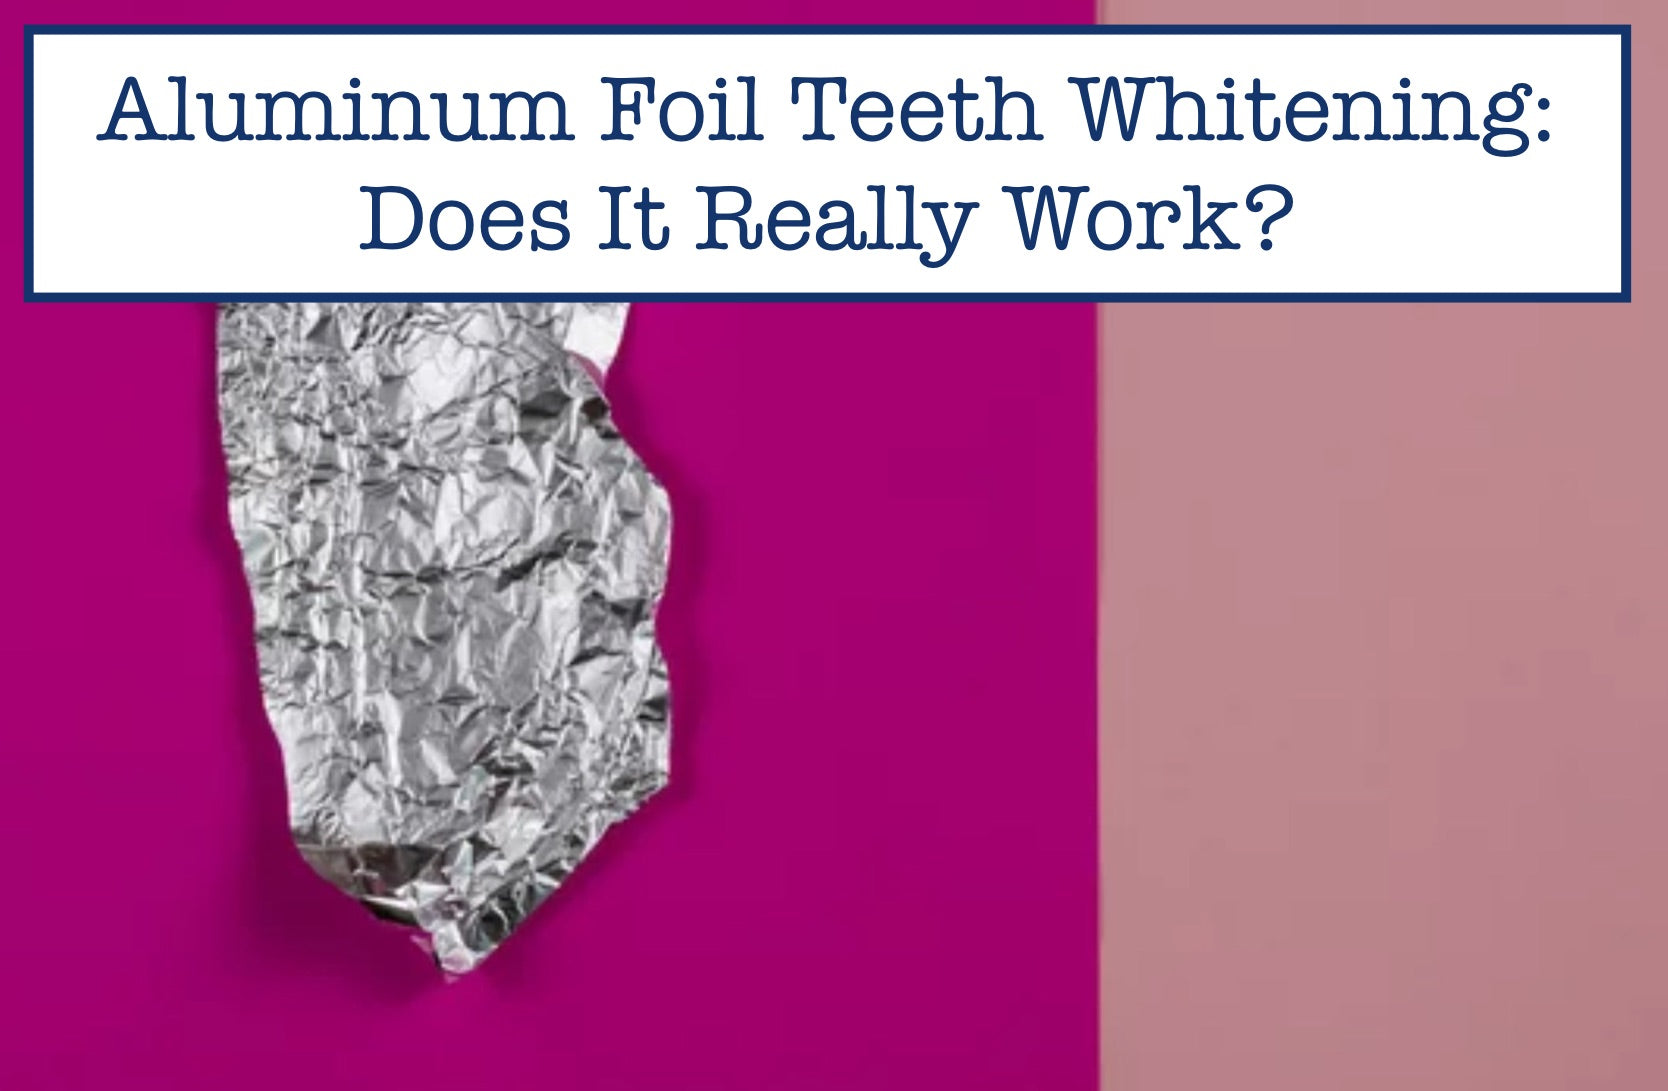 Aluminum Foil Teeth Whitening: Does It Really Work?